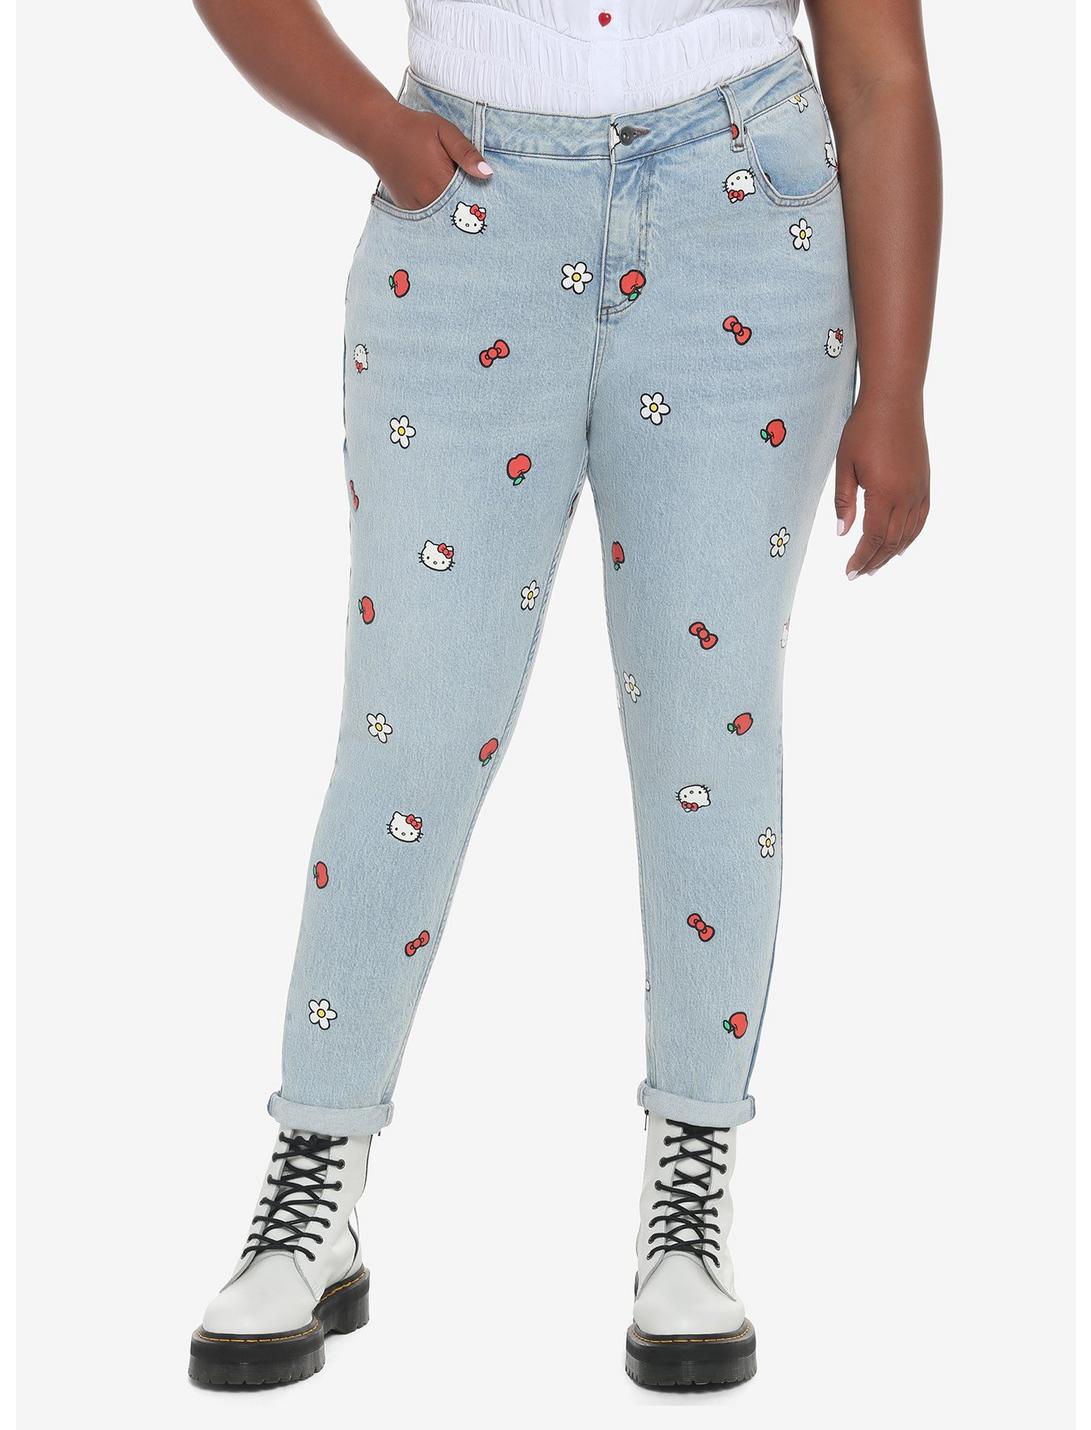 Hello Kitty Icons Mom Jeans Plus Size, LIGHT WASH, hi-res